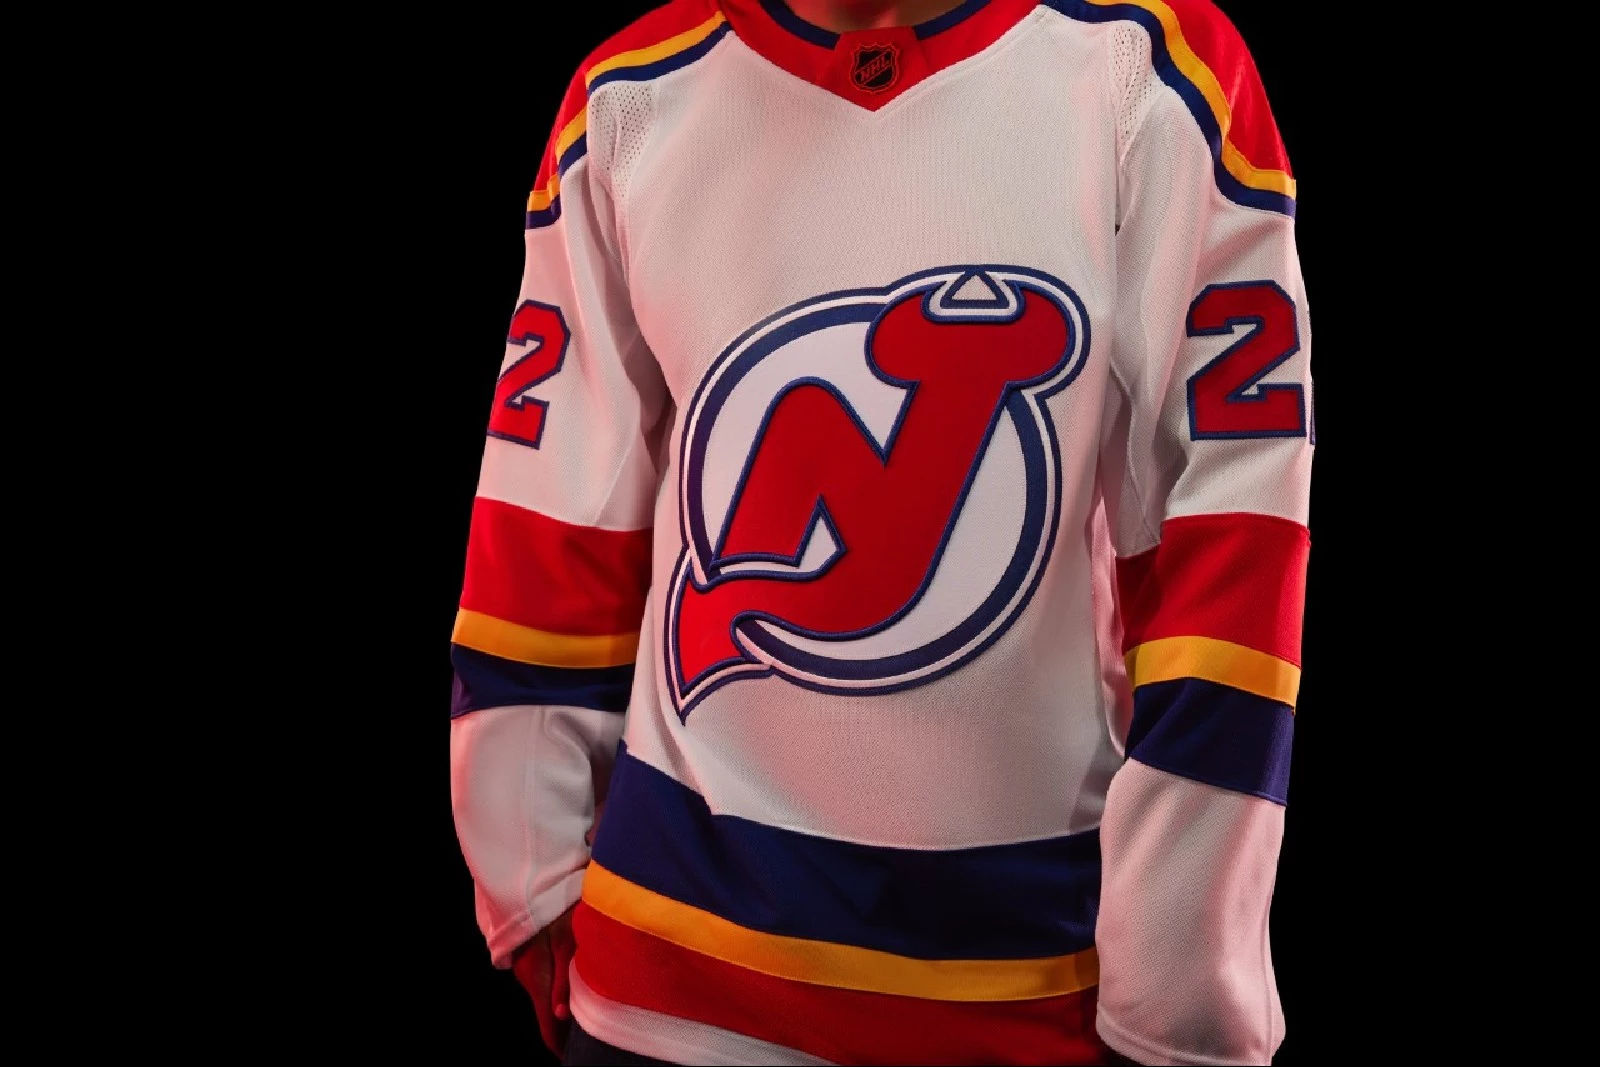 Devils announces schedule of games it will wear its retro jersey